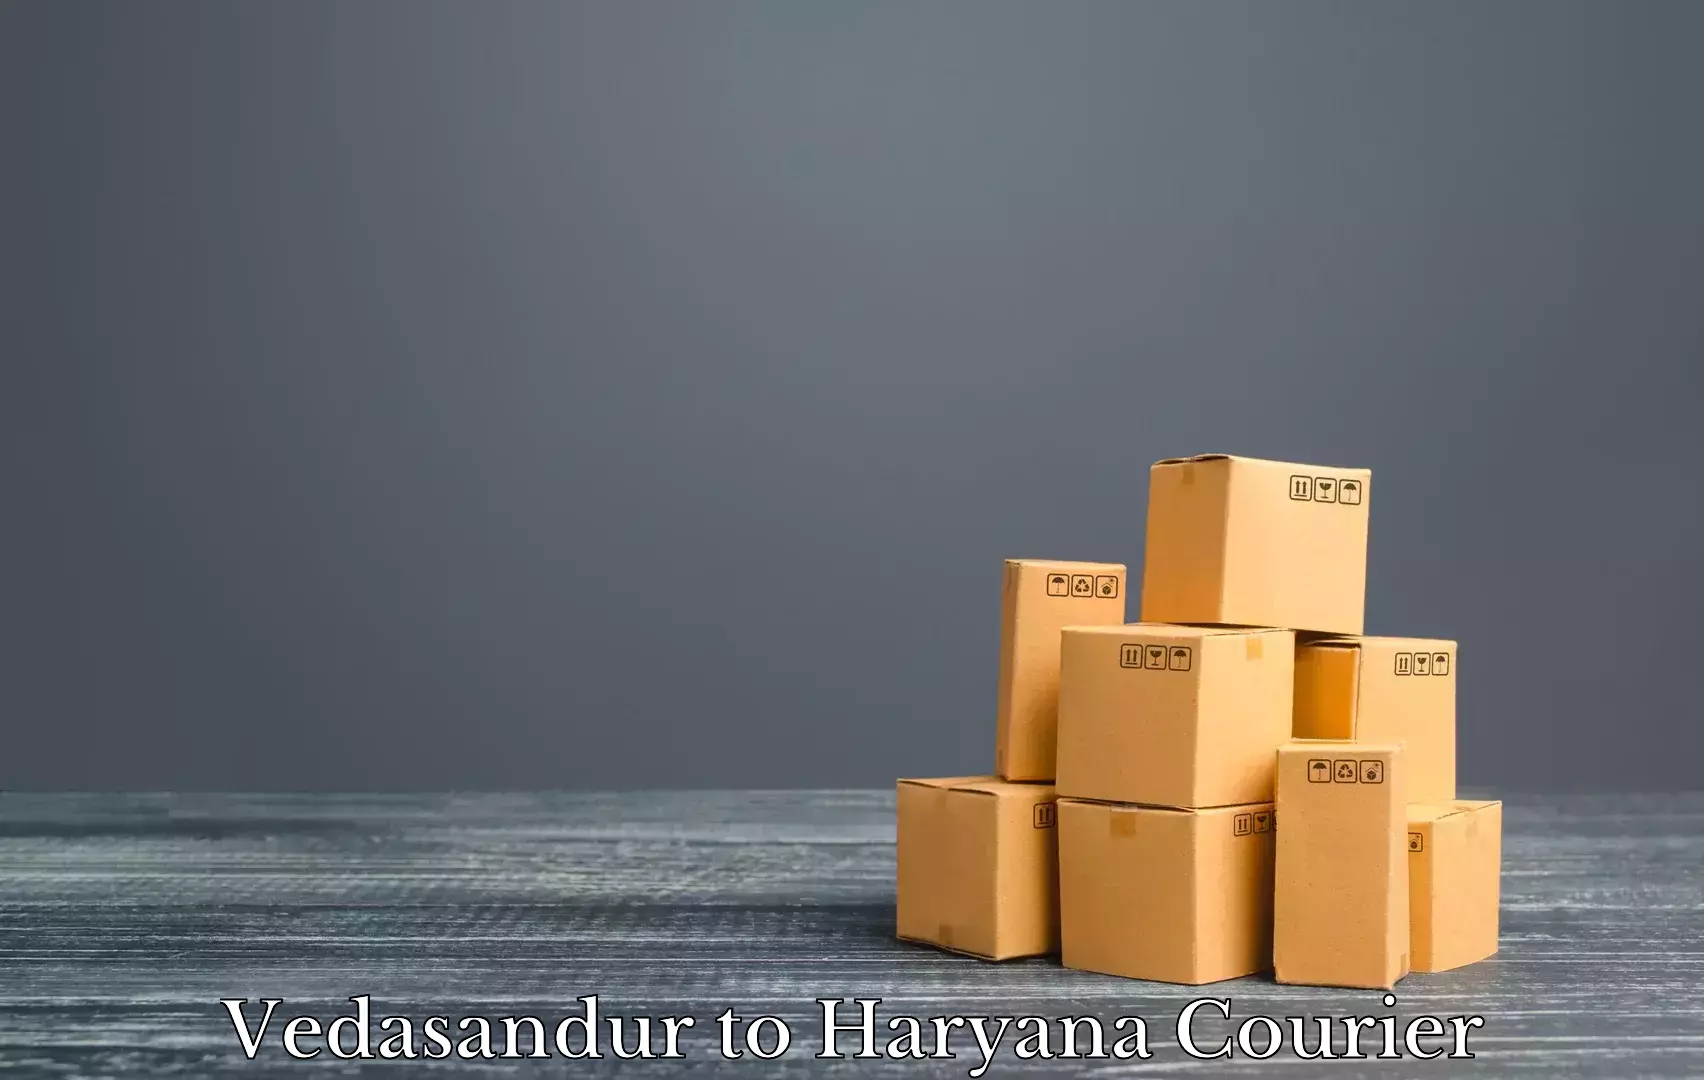 Furniture delivery service Vedasandur to Hodal